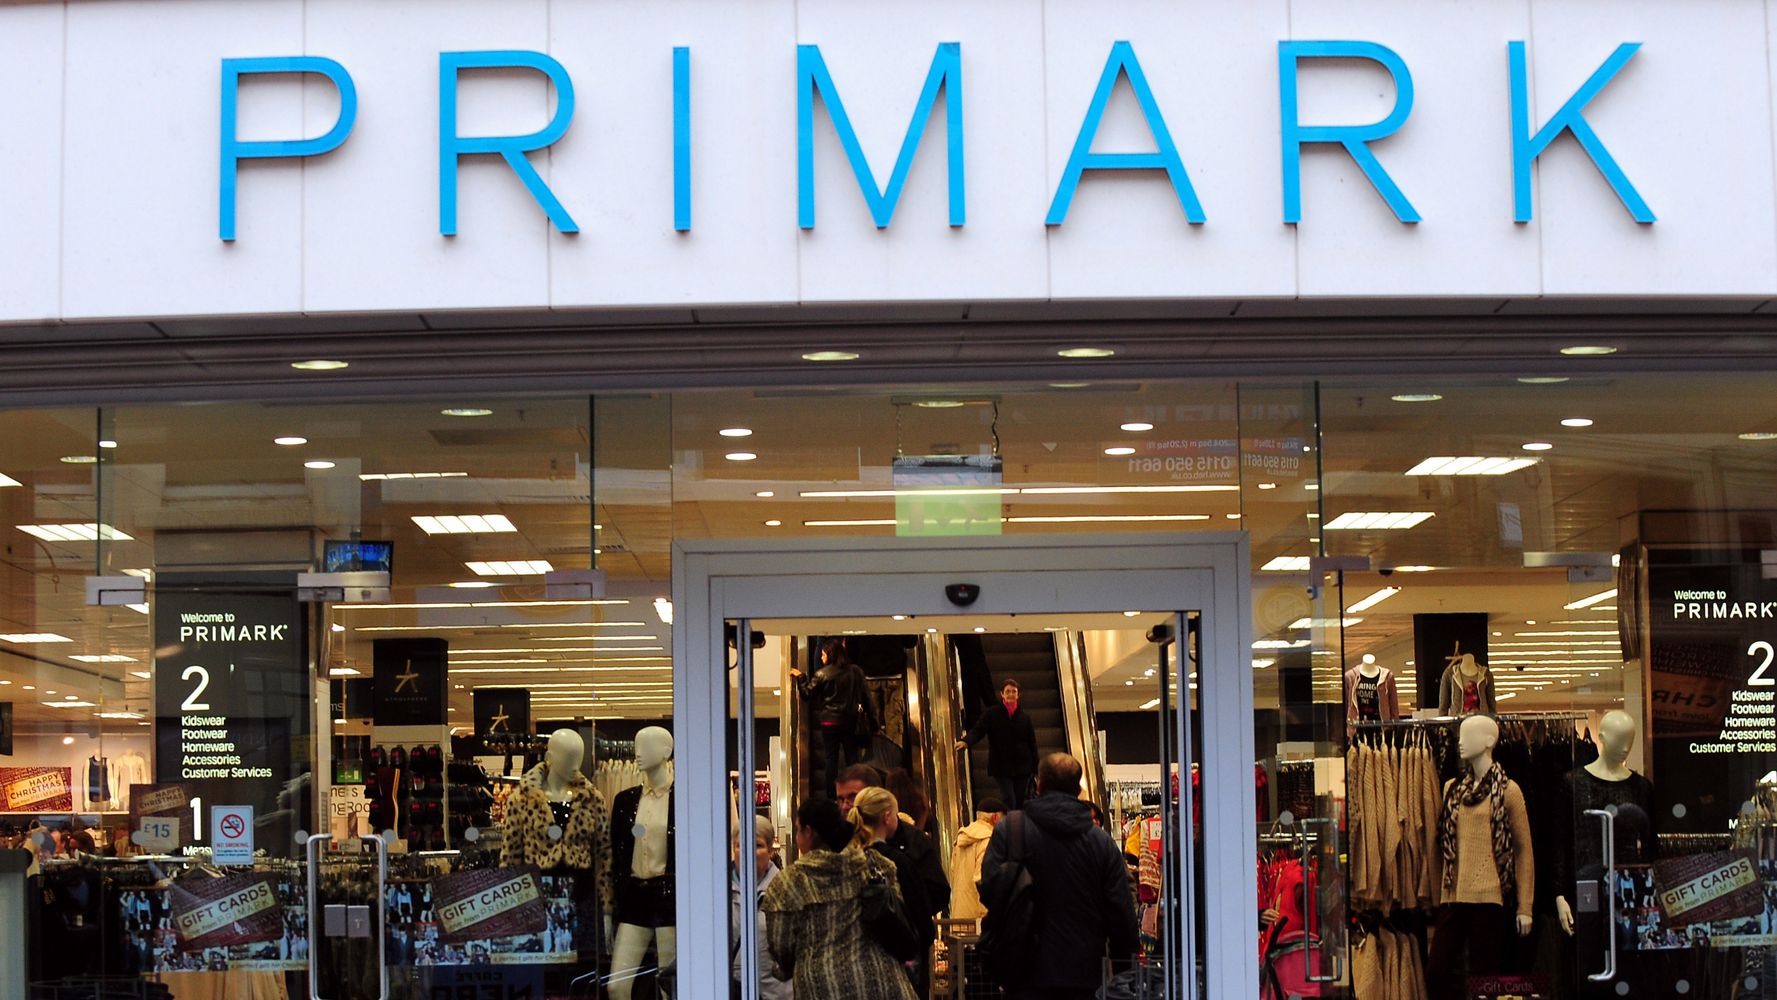 Primark launched 'parenthood' maternity range - and people are